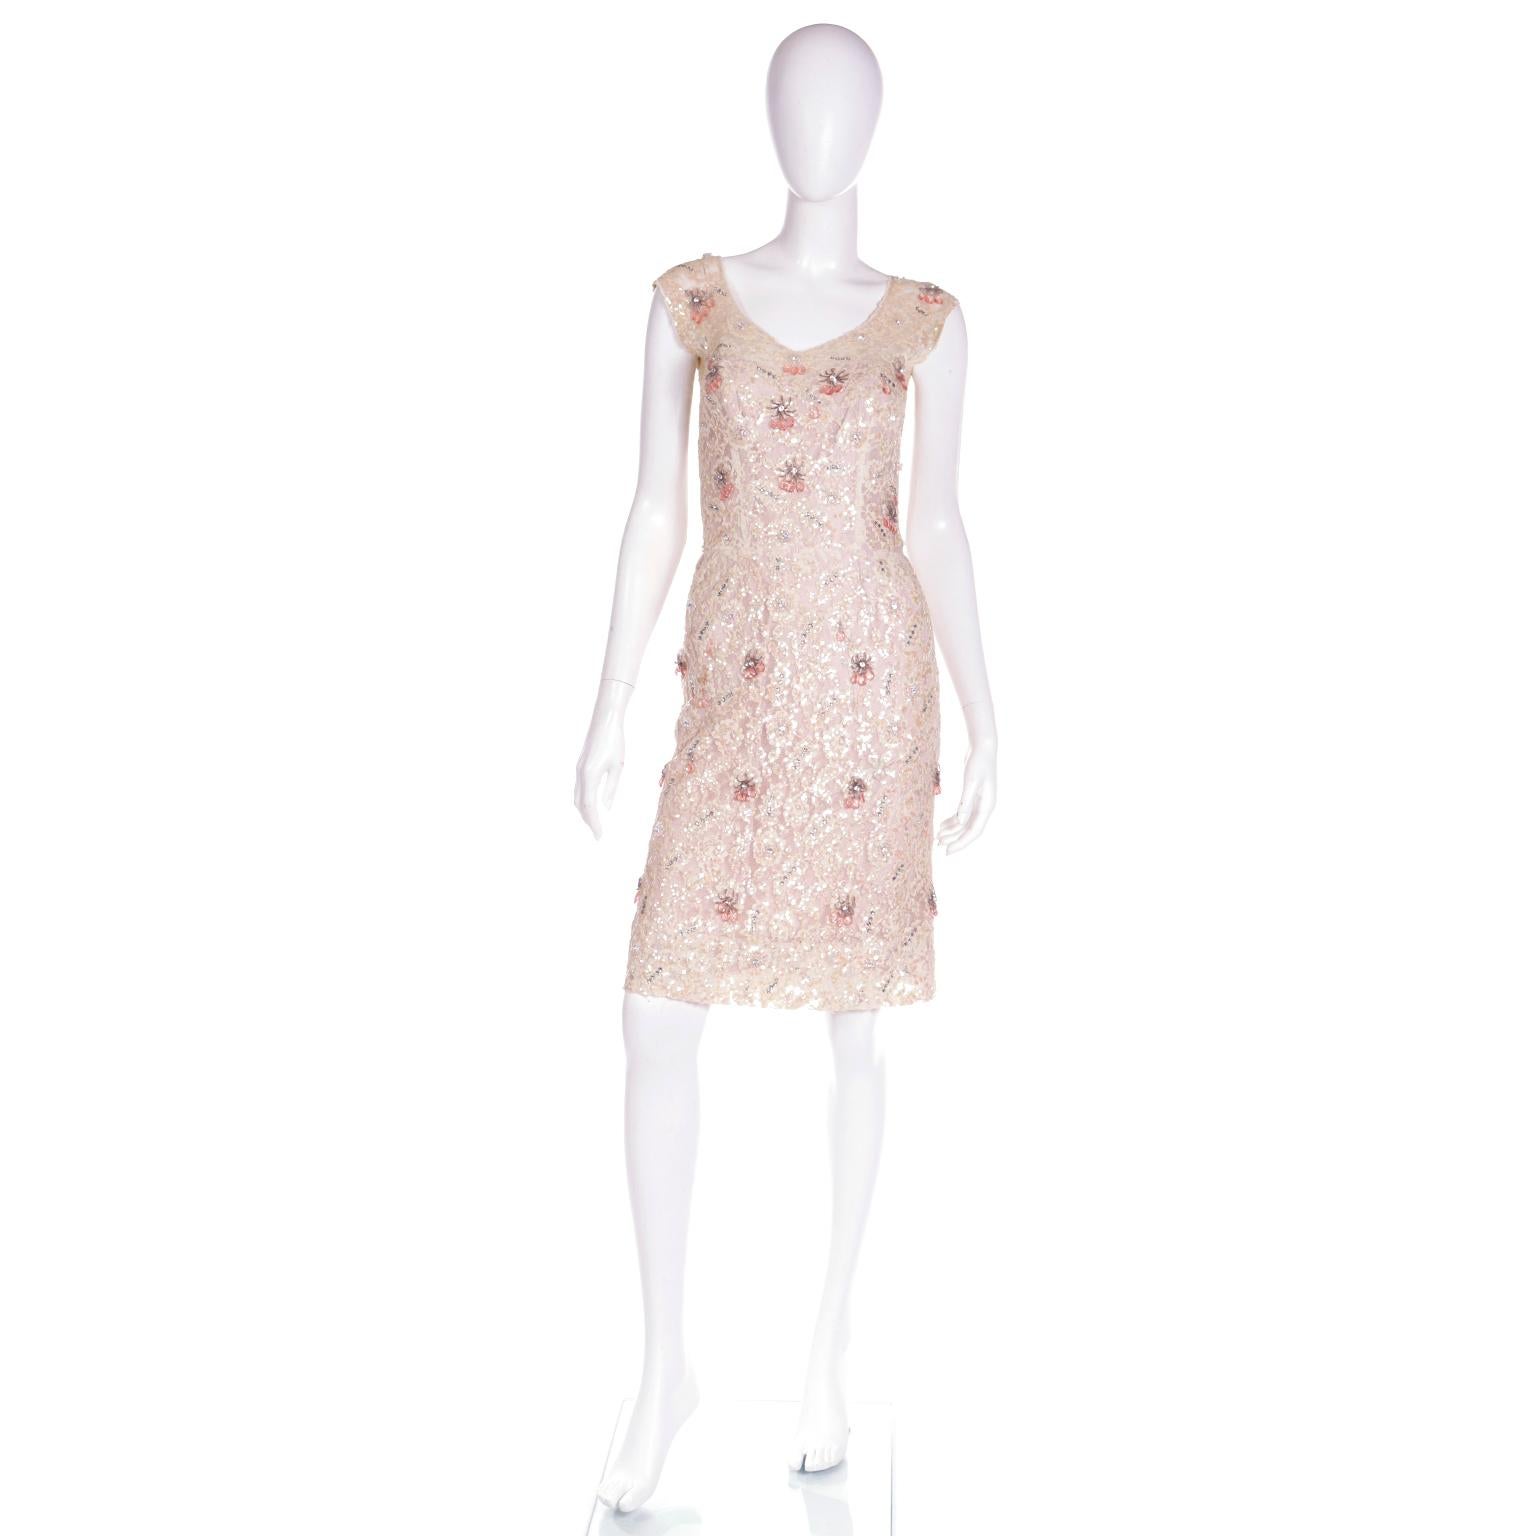 This is a stunning late 1950's Karen Stark for Harvey Berin wiggle dress with a pink satin lining under a lace overlay. The cream lace is embellished with rhinestones and a similar shade of iridescent sequins and the dress has a nice inner corset